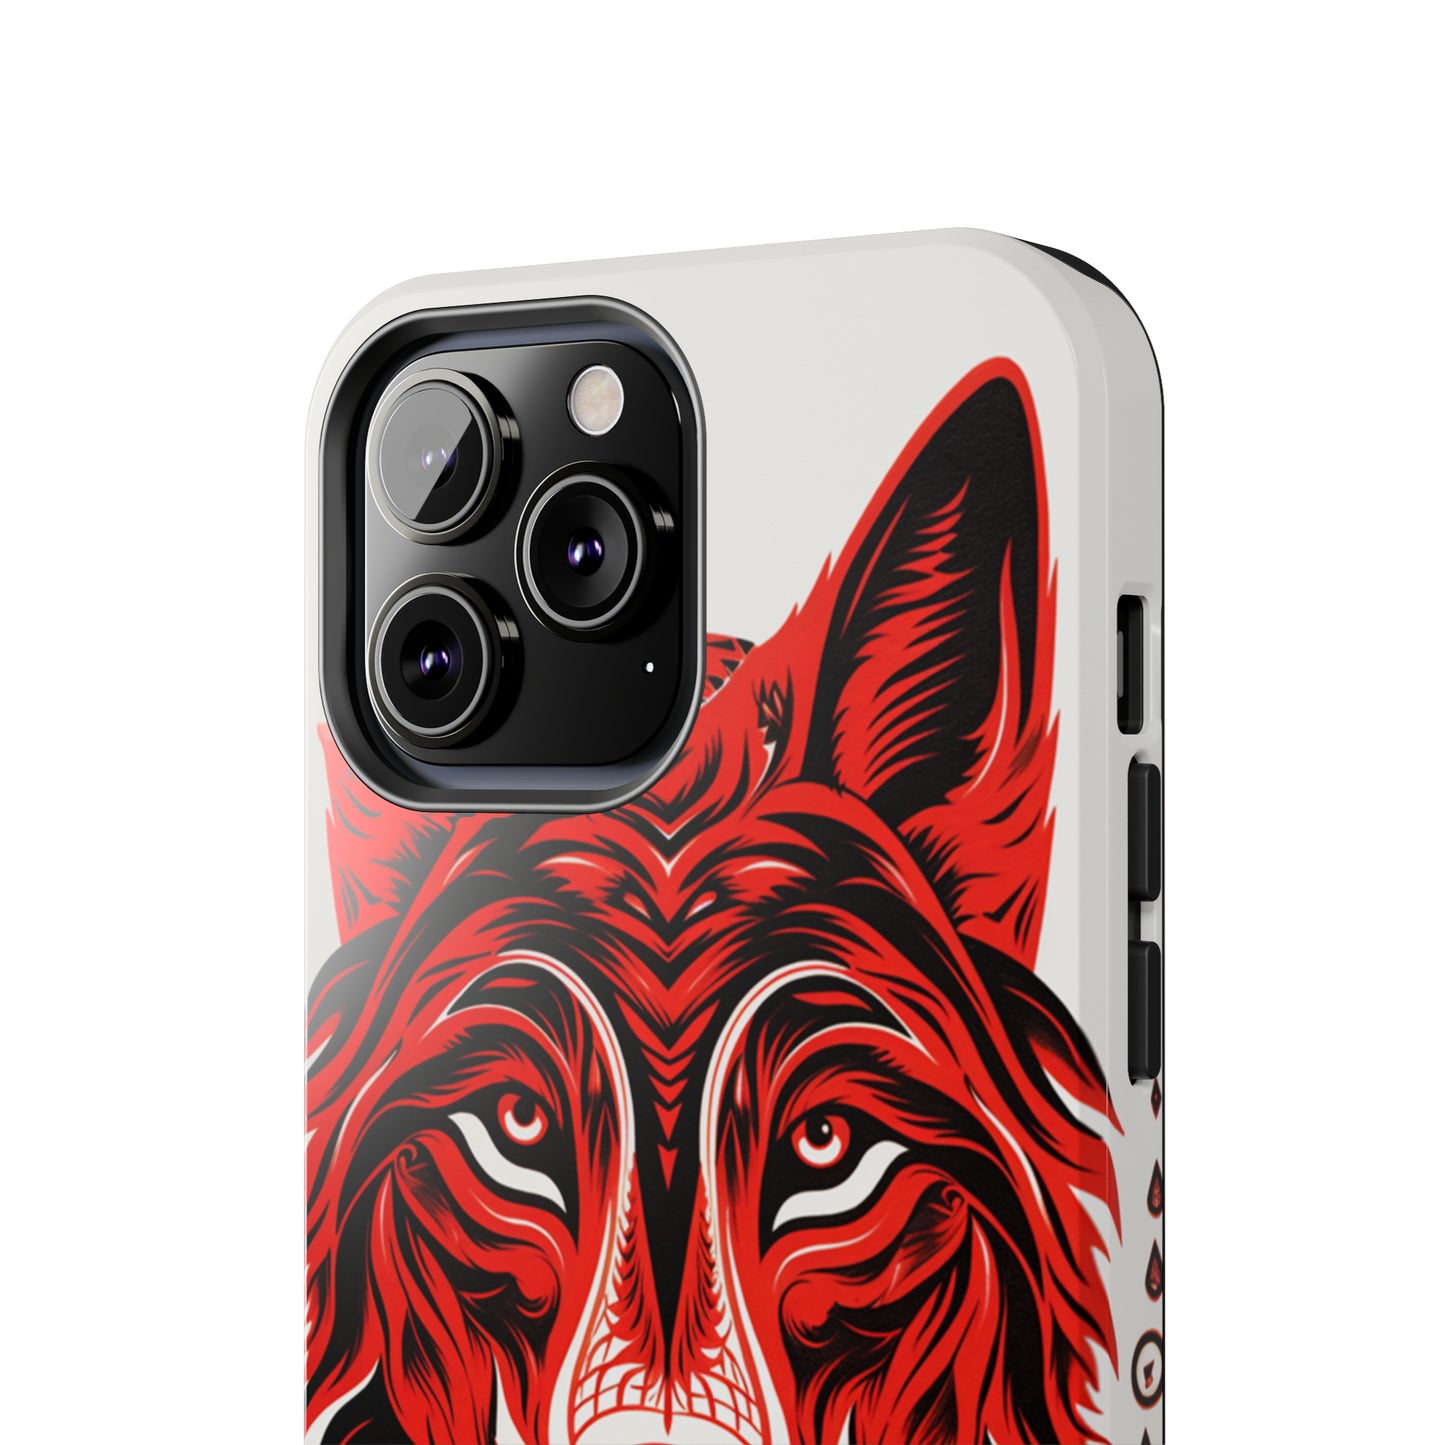 Mystic Echoes: Native American Tribal Wolf | Cultural Heritage iPhone Case